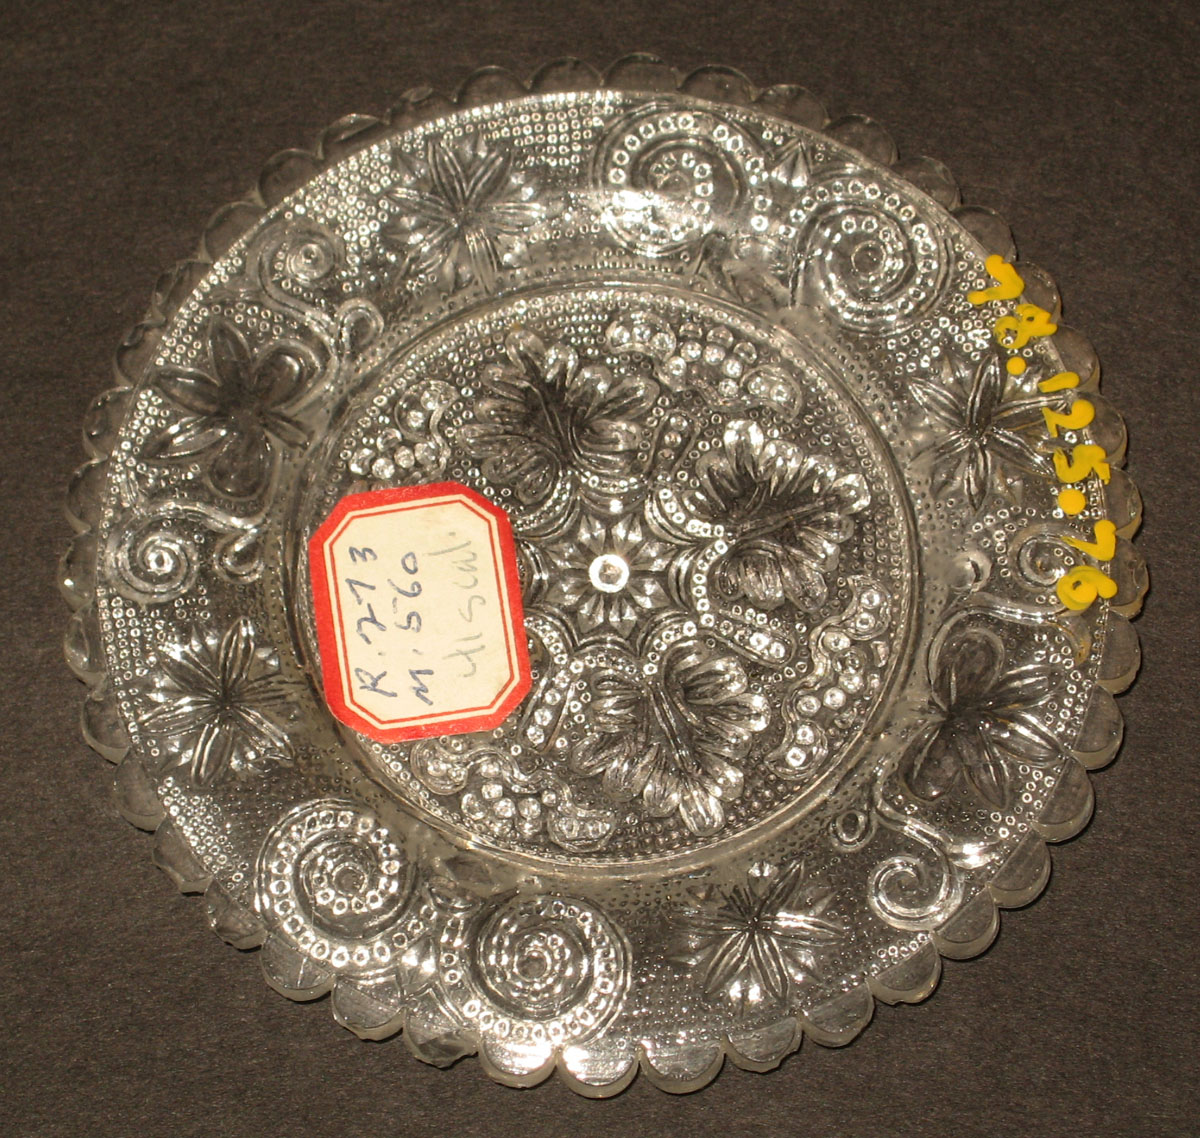 1978.0125.076 Glass cup plate